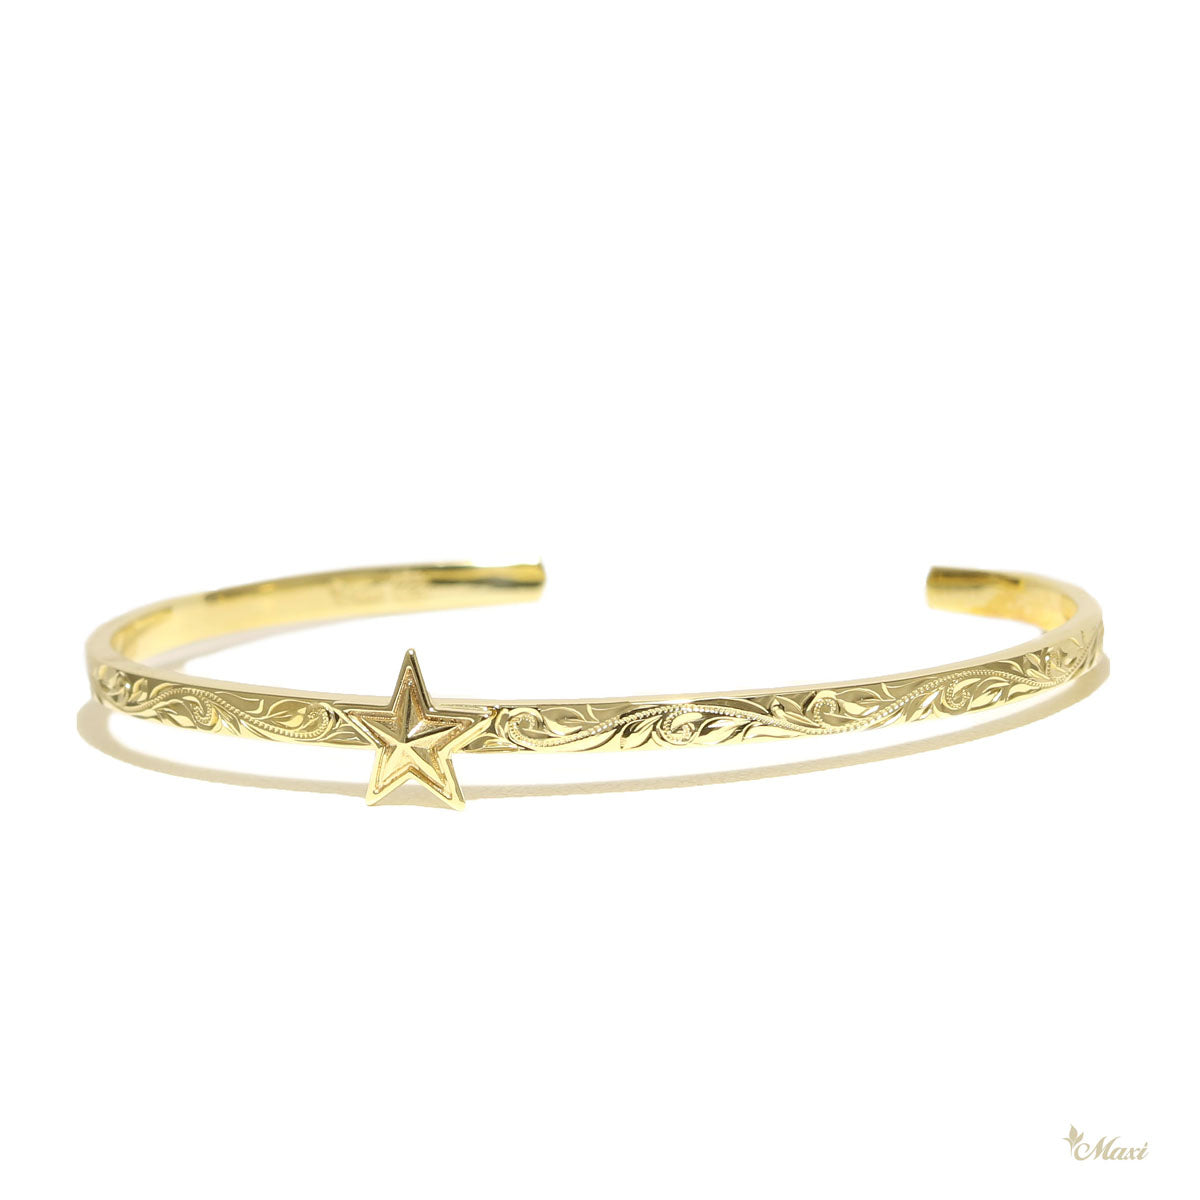 14K Yellow Gold] Star Open Bangle Bracelet-Hand Engraved Traditional – Maxi  Hawaiian Jewelry マキシ ハワイアンジュエリー ハワイ本店